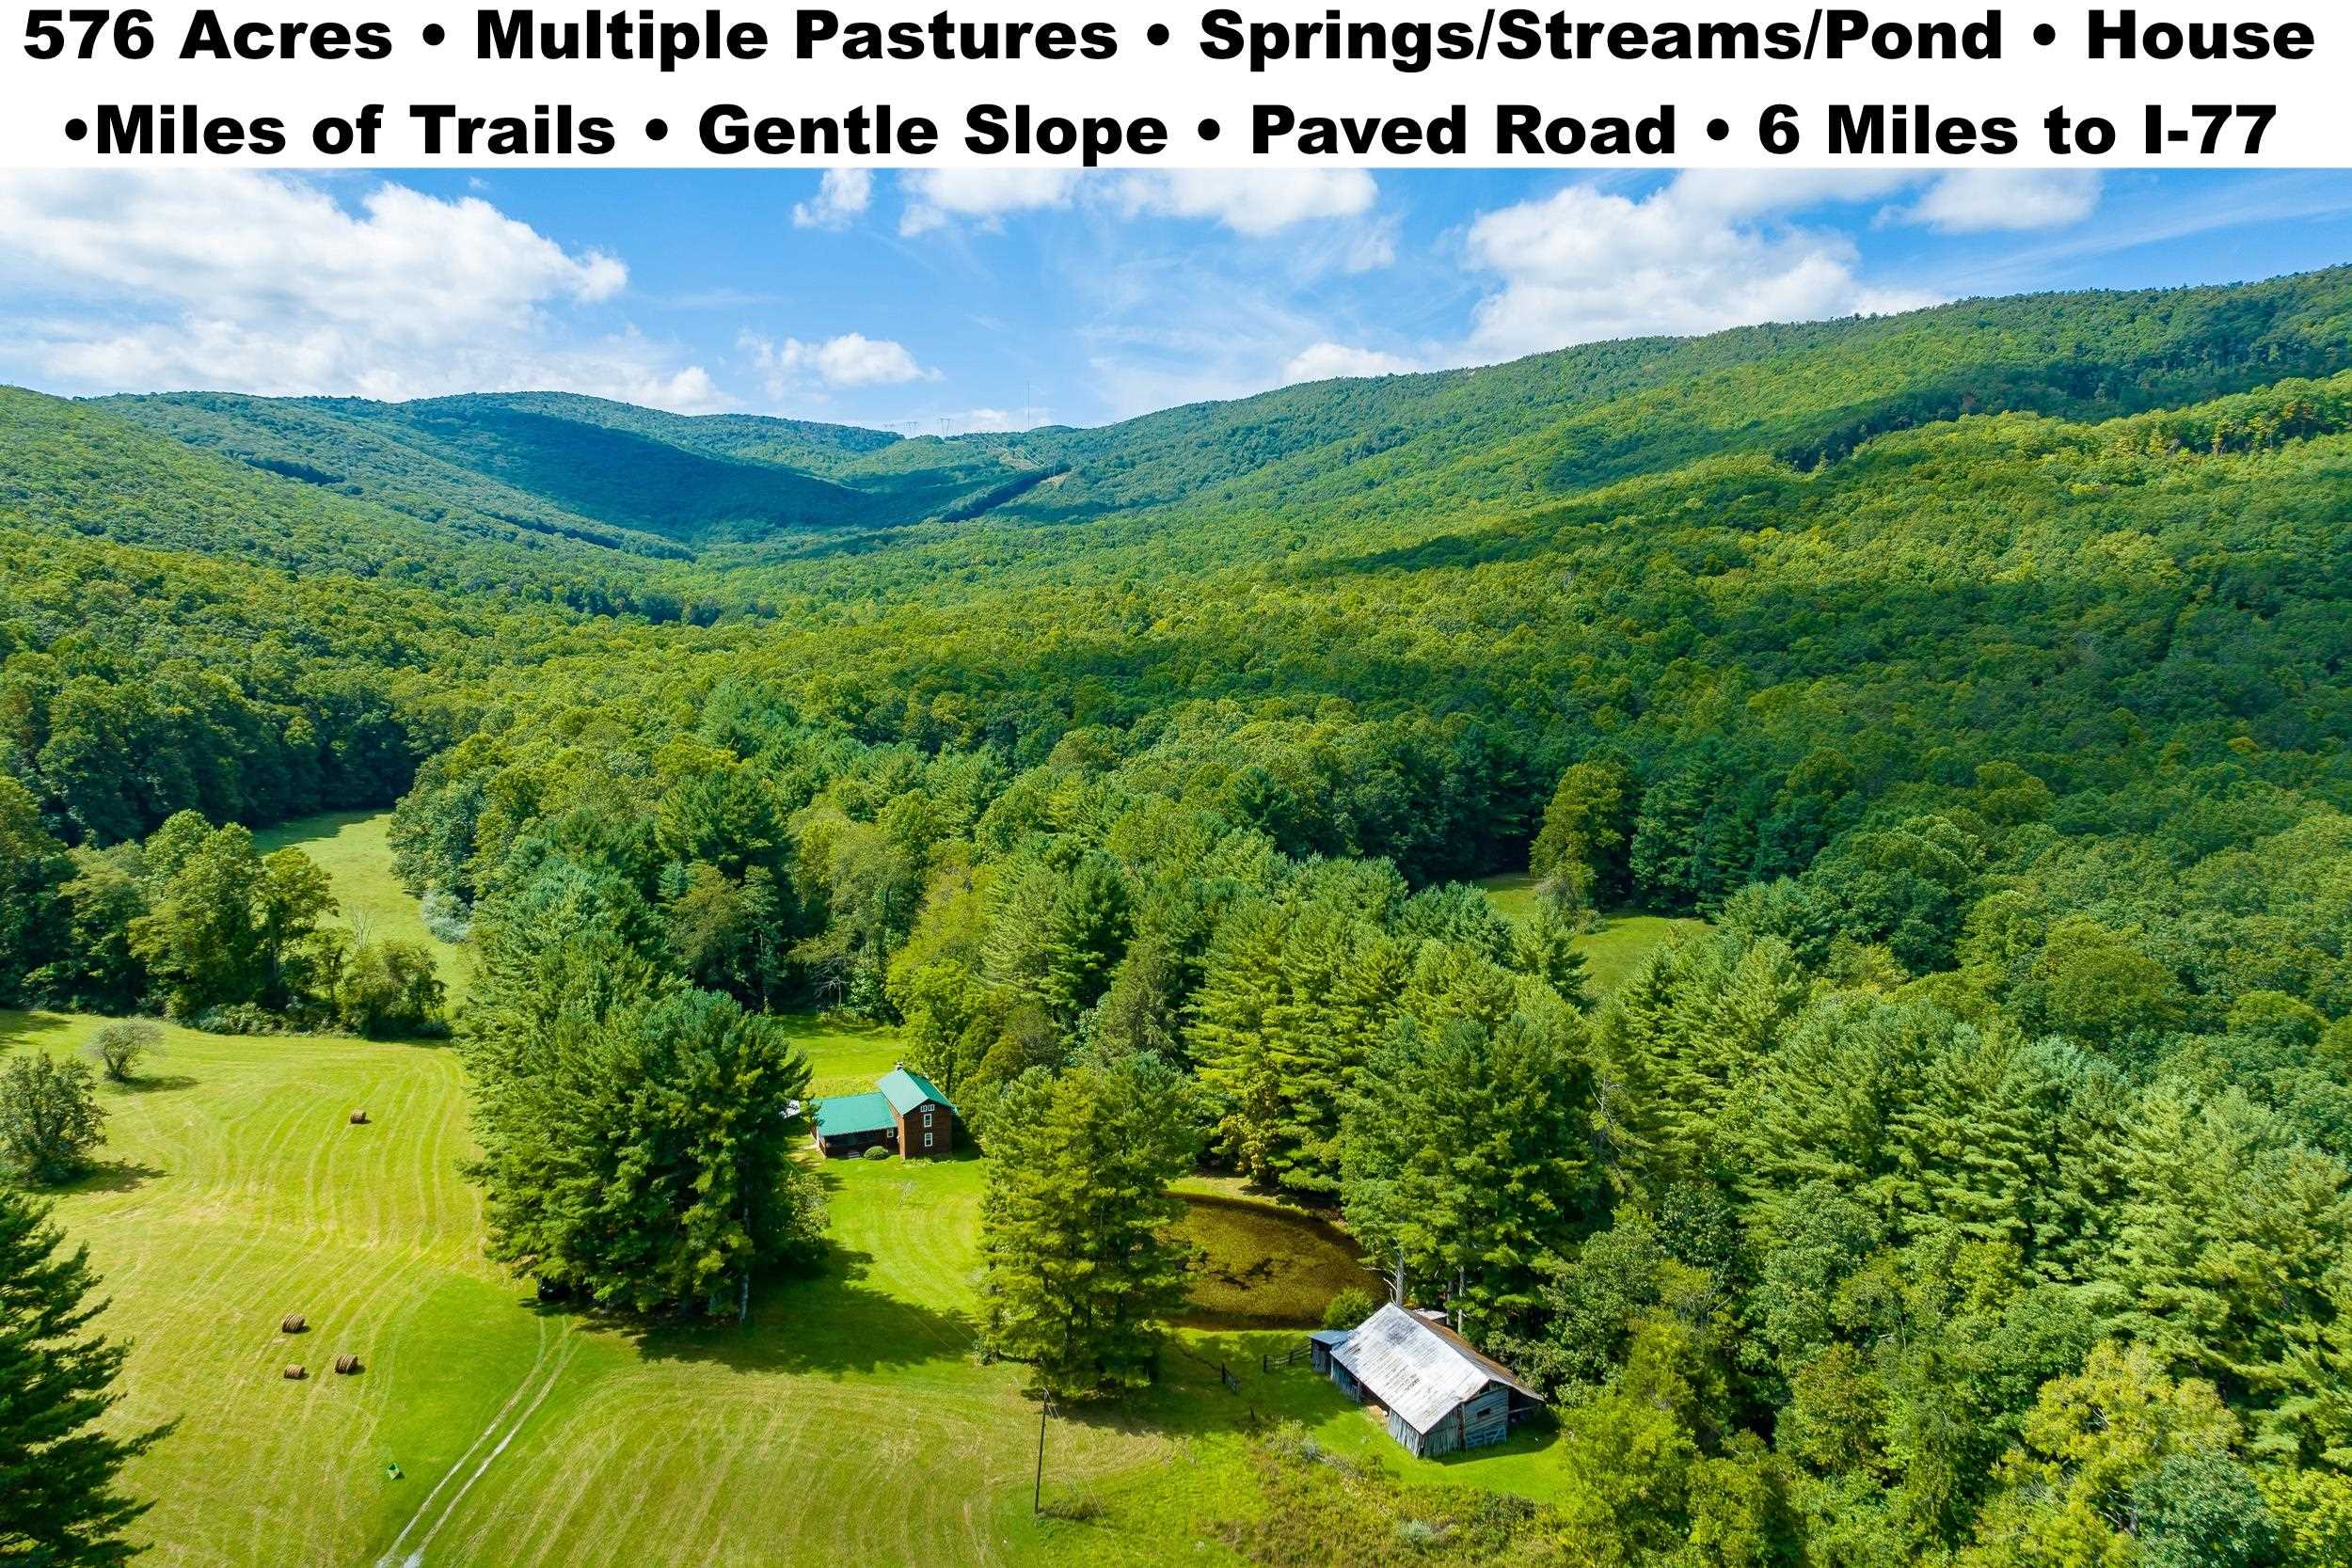 One of a kind property with endless opportunities! Laurel Fork Rd dead ends into this property making it easily accessible for everything from a sports car to an 18 wheeler. From the moment you reach the entrance you can hear the creek that runs through the property. The property runs from ridge to ridge with the northern ridge serving as the border between the two Virginias. The land is not too steep on either ridge, offering plenty of opportunities for whatever you have planned. Two log cabins were combined to make one home with everything you need. Outside the home is a large pond & older barn with the creek running behind both. There are multiple pastures separated by woods & easy to access with roads/trails. Between trails & old logging roads nearly the entire property can be accessed via riding or hiking. If you are looking for a secluded property with easy access, mountain views, an abundance of wildlife & plenty of water features, then this is the place for you.